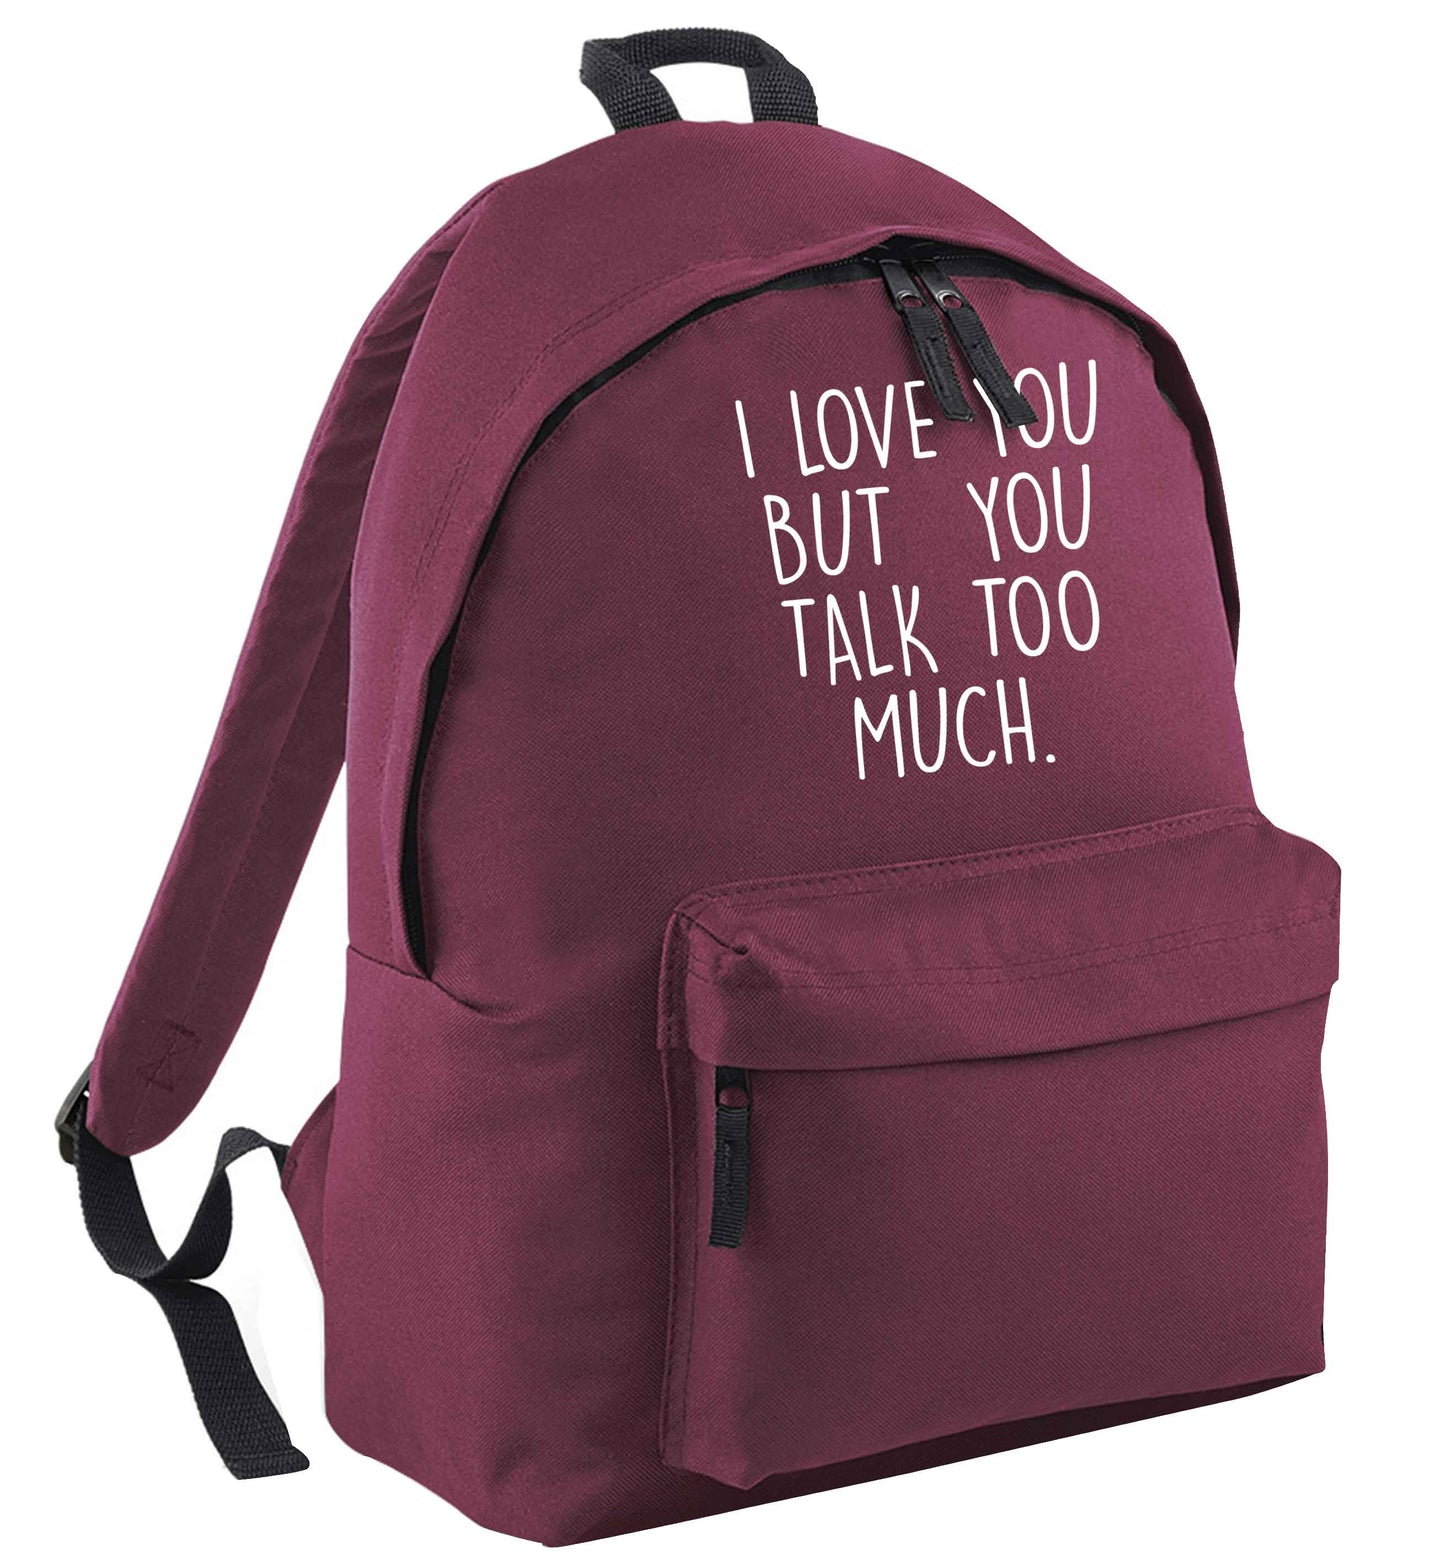 I love you but you talk too much | Children's backpack